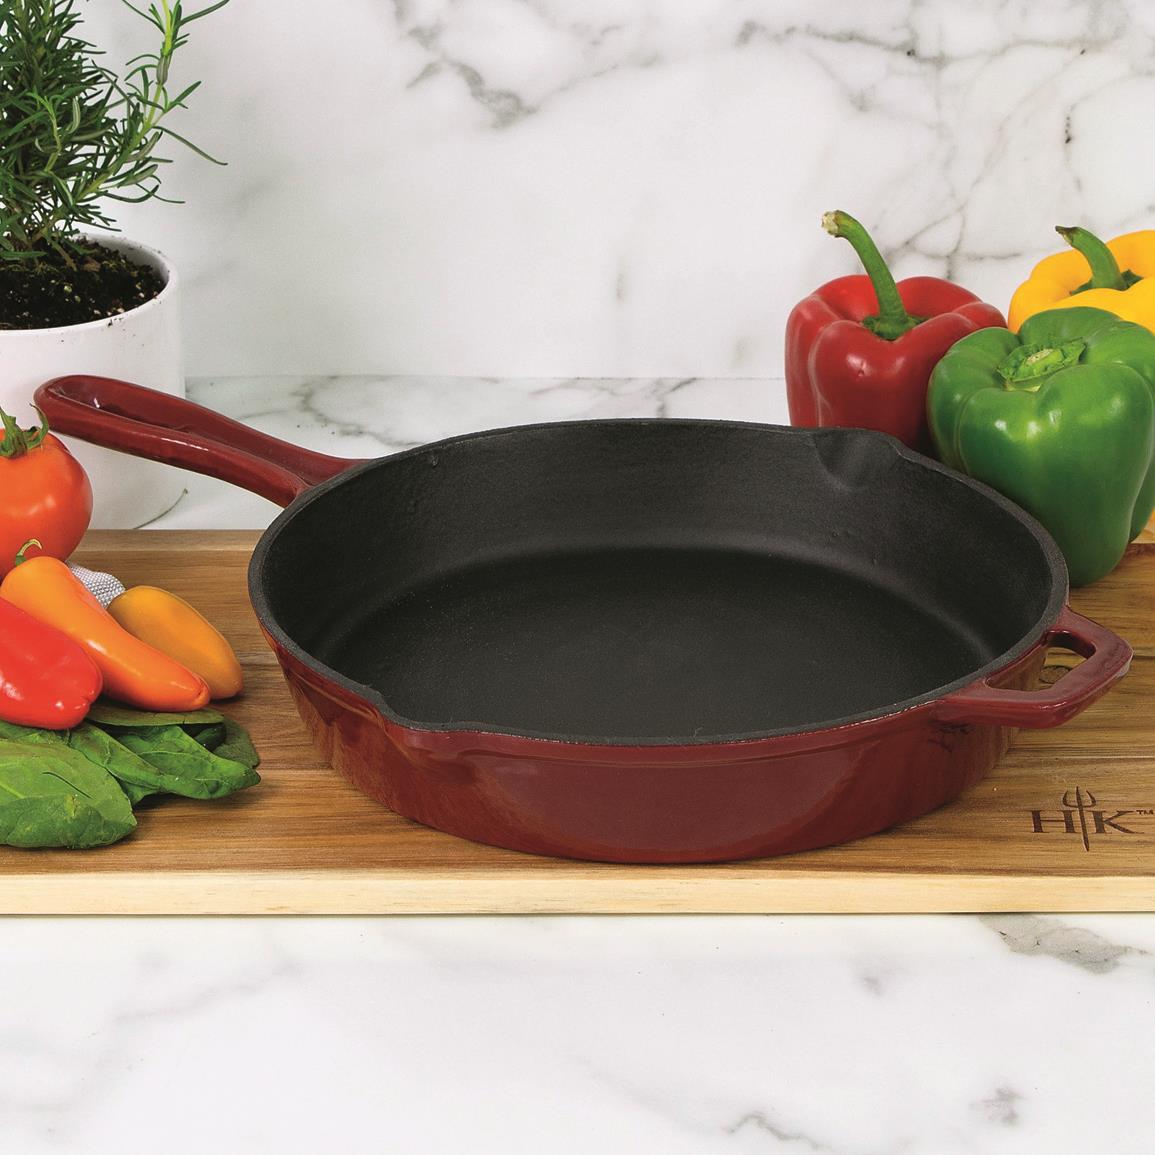 Hell's Kitchen 10.5 Cast Iron Skillet - 736757, Cookware at Sportsman's  Guide